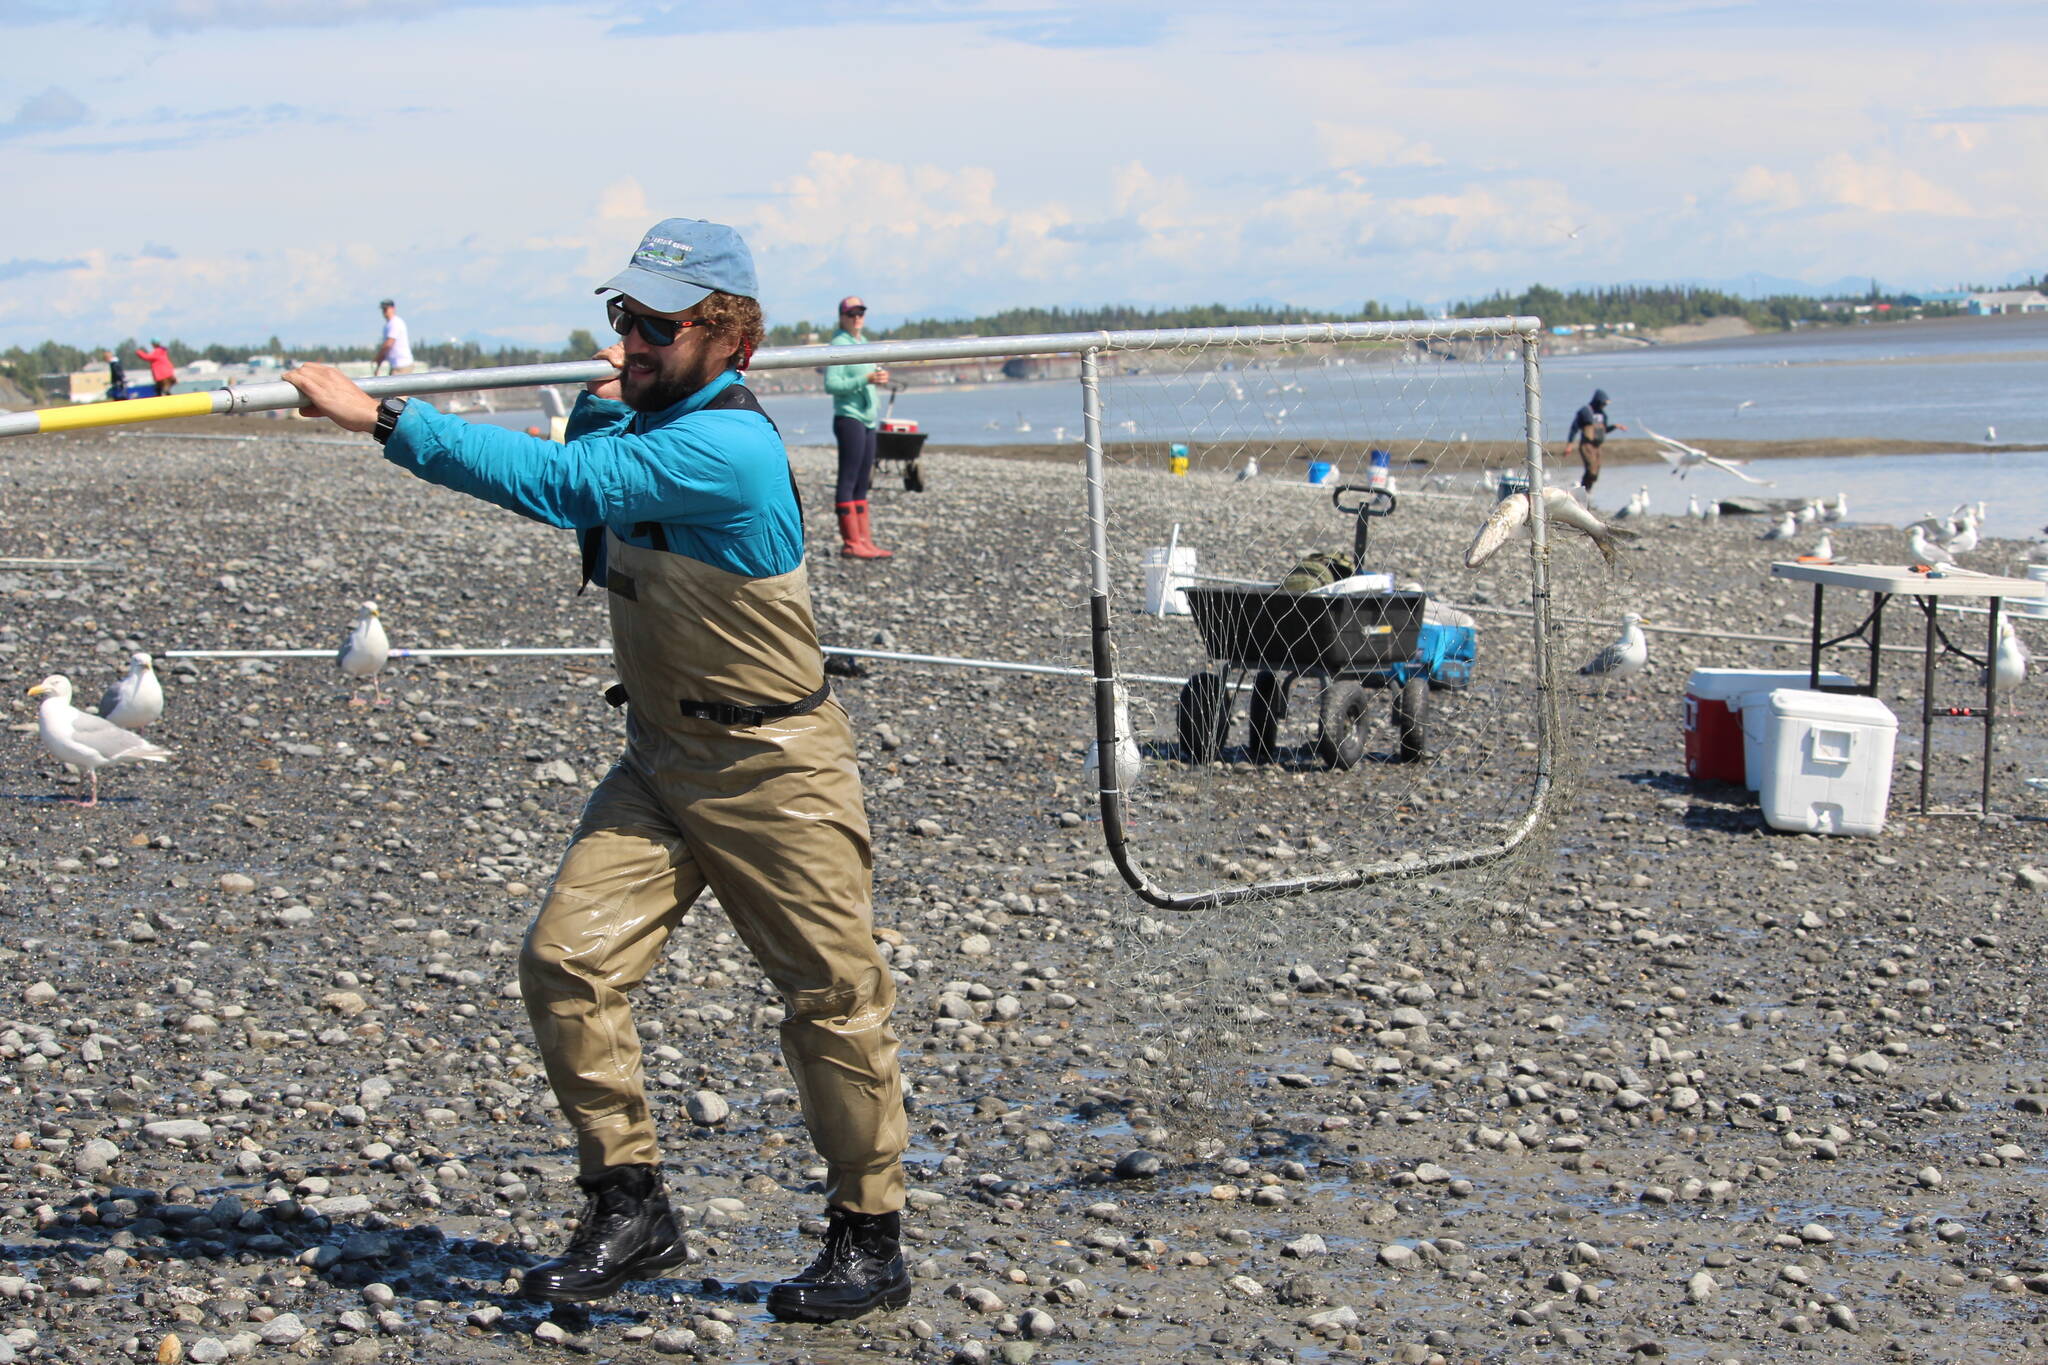 Shawn Dick of Talkneetna carries a fresh catch out of the water while dipnetting on the Kenai Beach on July 10, 2020. (Peninsula Clarion file)